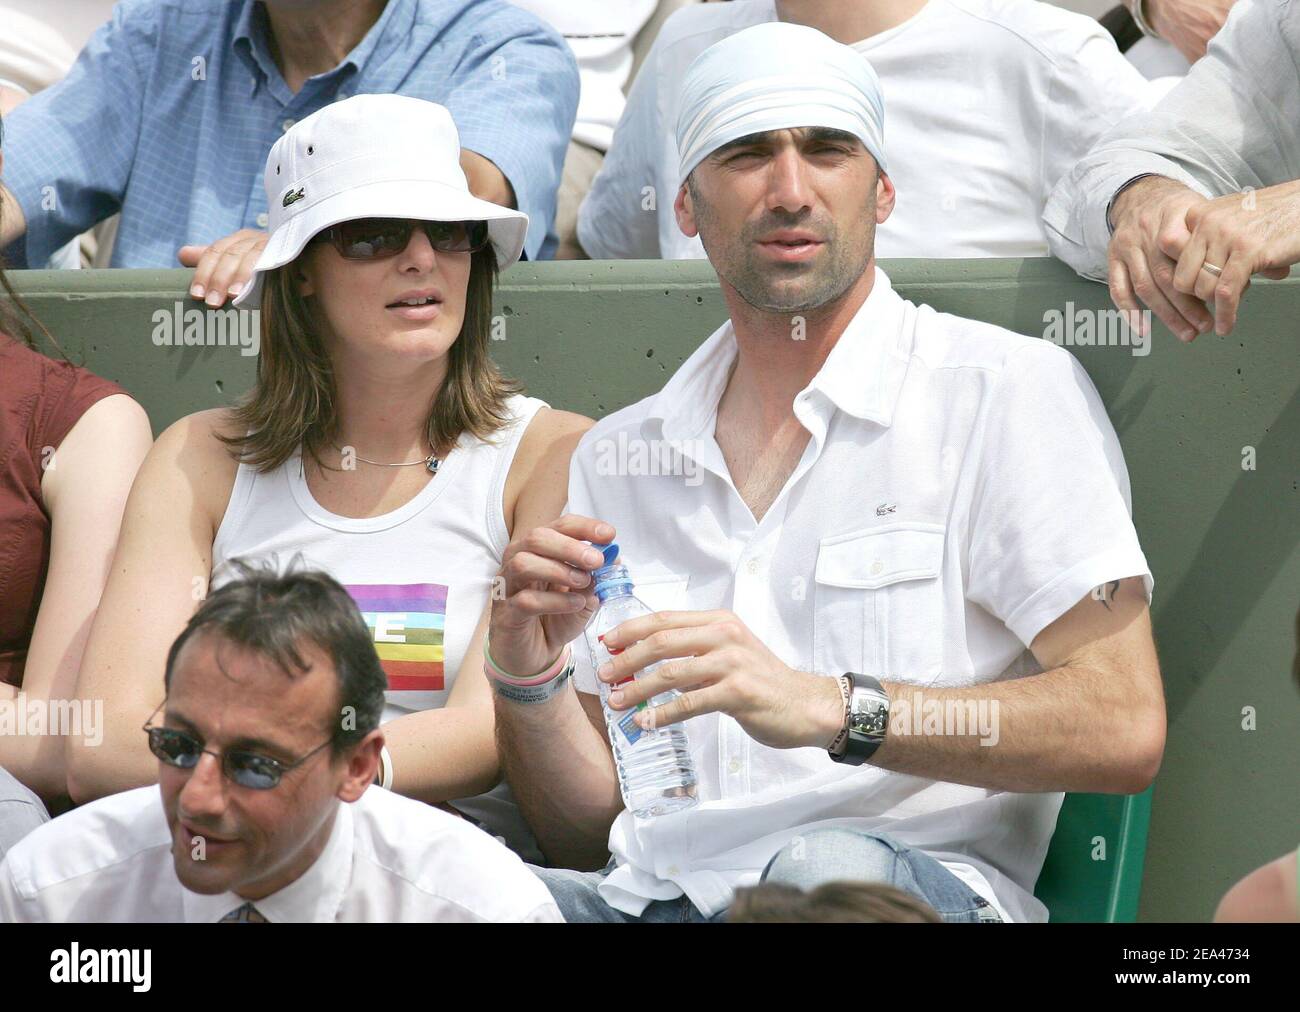 French soccer player (PSG) Jerome Alonzo and a female friend attend the match between French players Amelie Mauresmo and Alize Cornet in the second round of the French Open at the Roland Garros stadium in Paris, France, on May 26, 2005. Photo by Gorassini-Zabulon/ABACA. Stock Photo